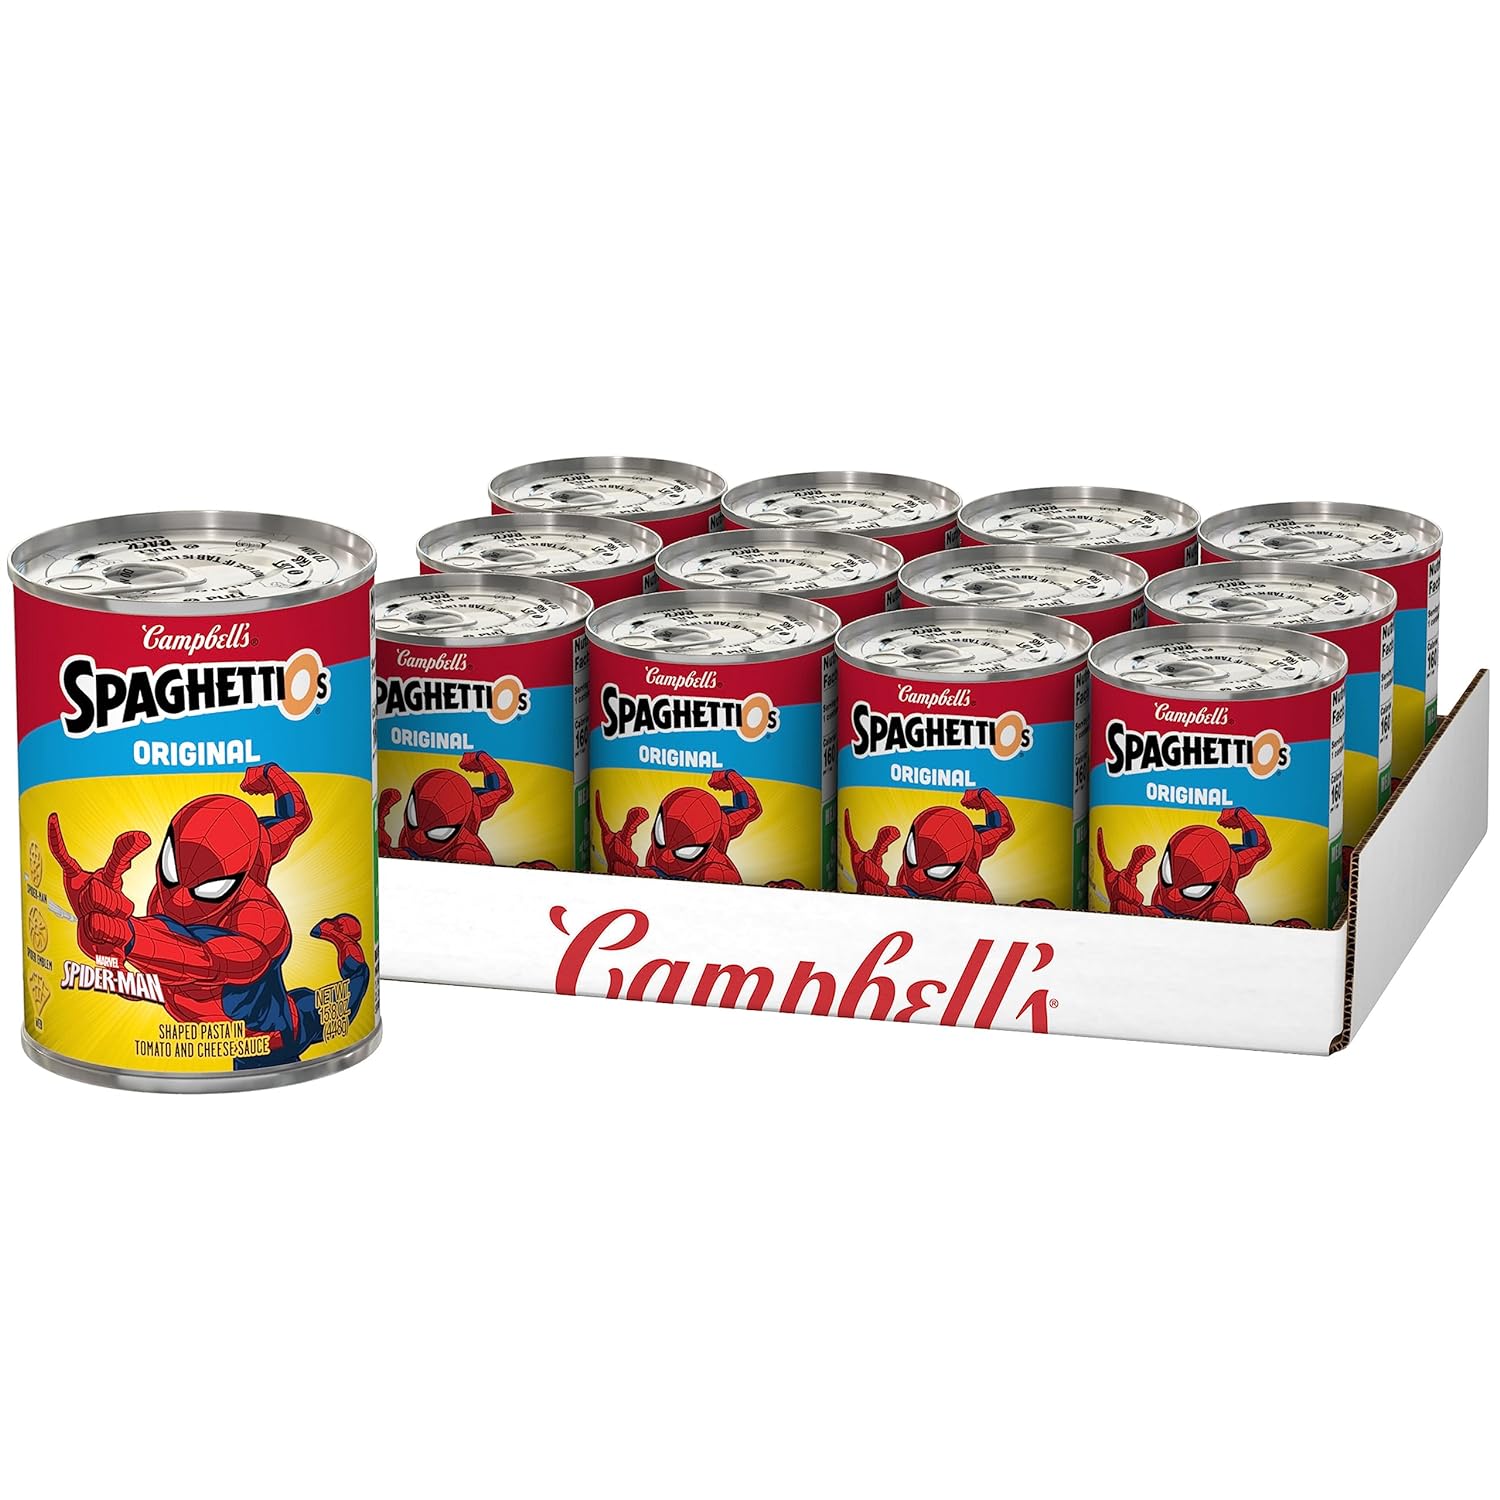 SpaghettiOs Original Marvel's Spider-Man Shaped Canned Pasta, 15.8 oz Can (Pack of 12)